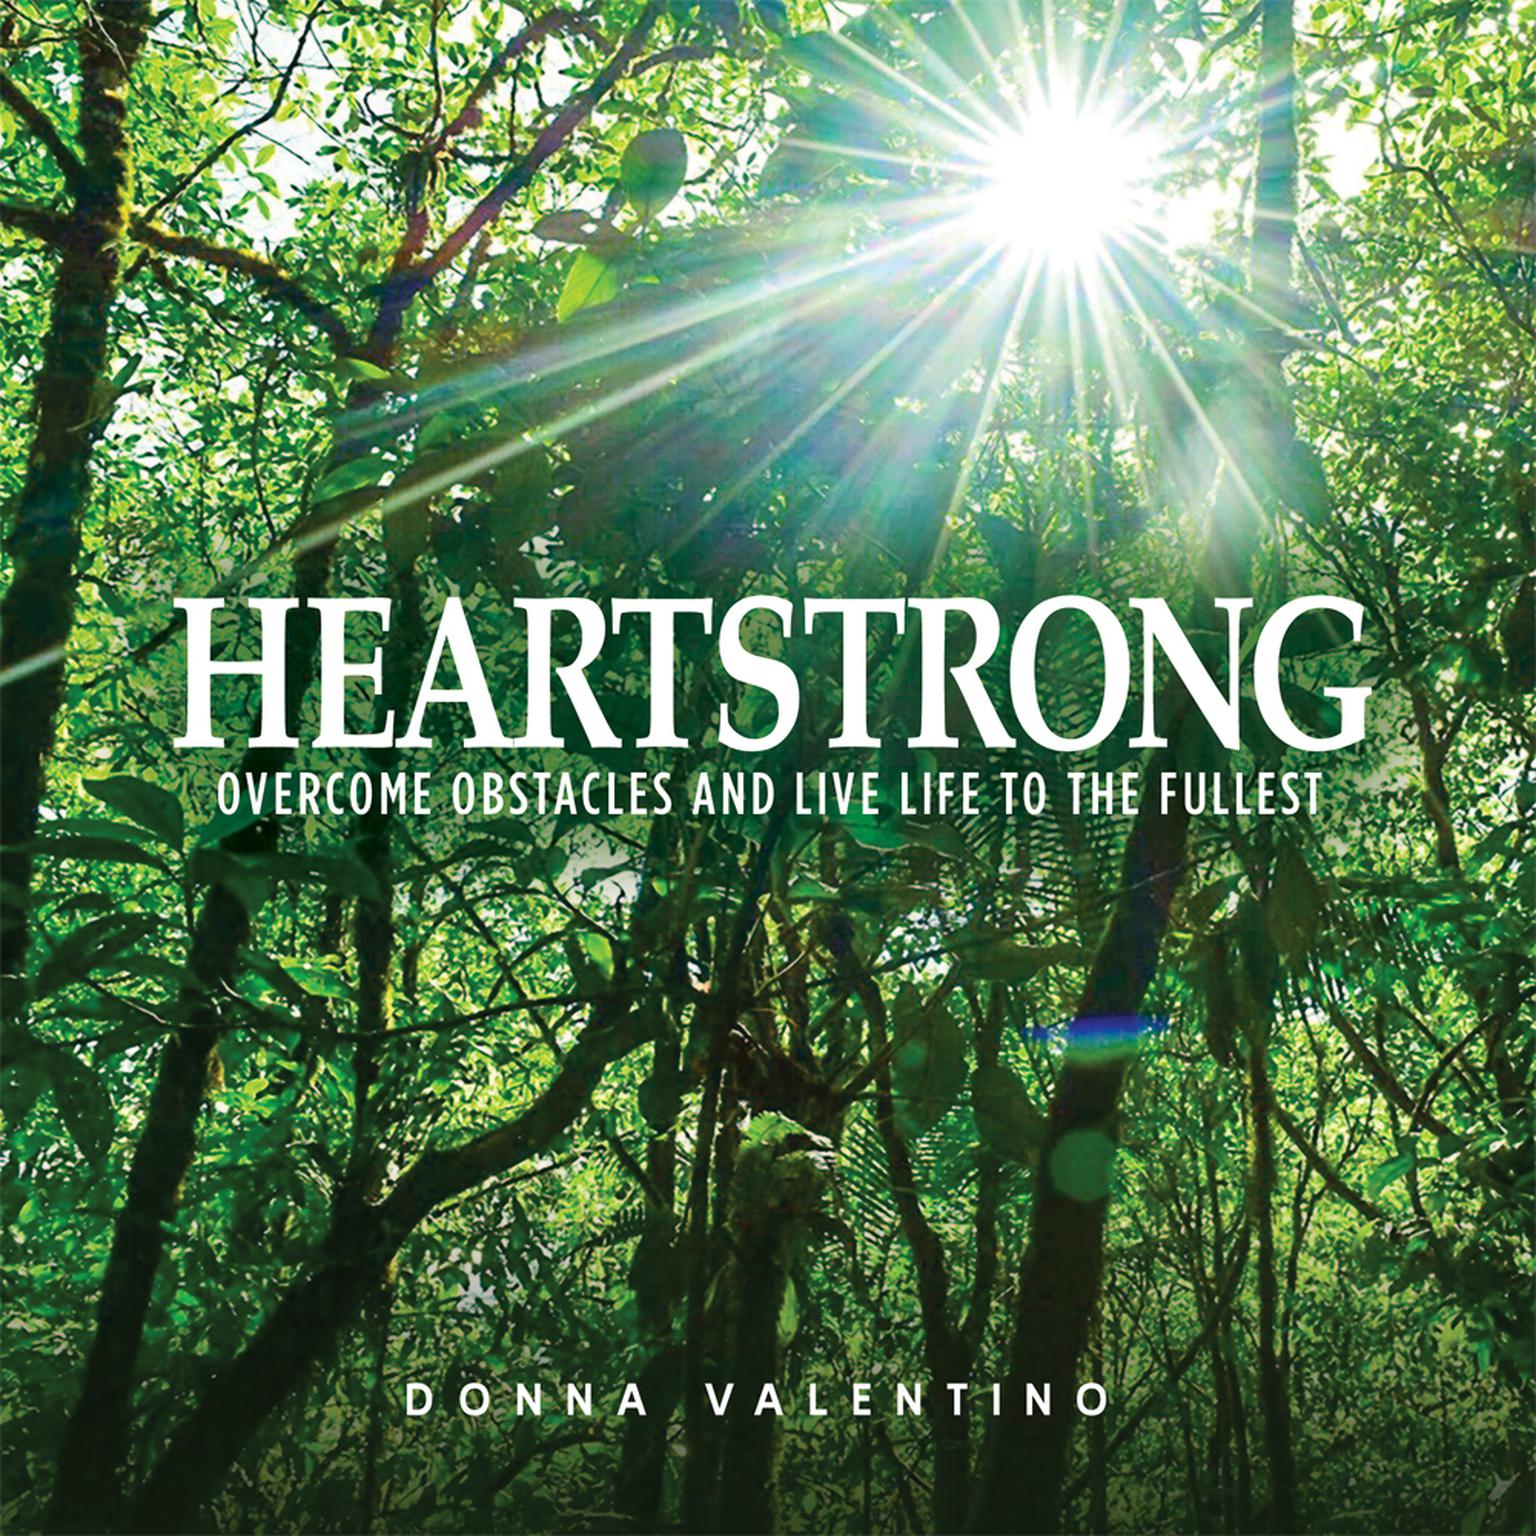 Heartstrong: Overcome Obstacles and Live Life to the Fullest Audiobook, by Donna Valentino